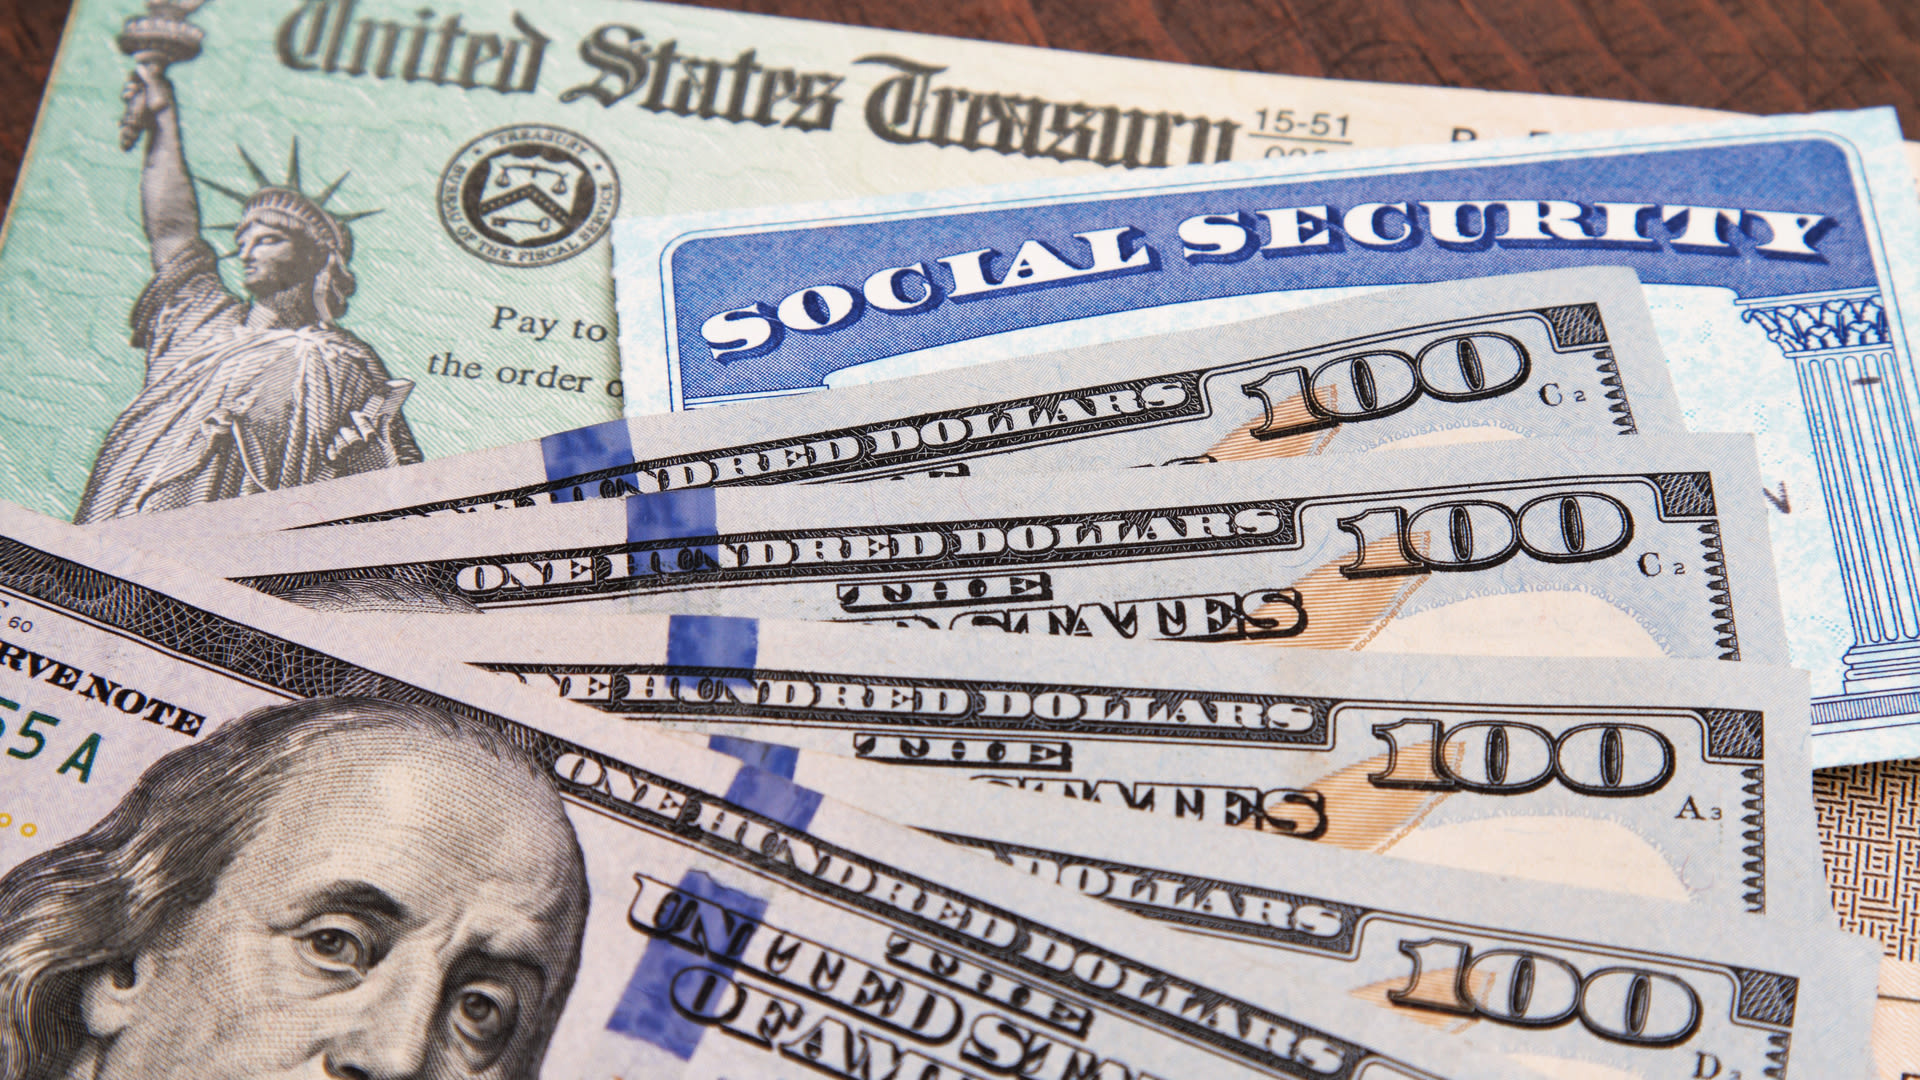 6 Ways To Use Social Security To Fund Your Retirement Dreams